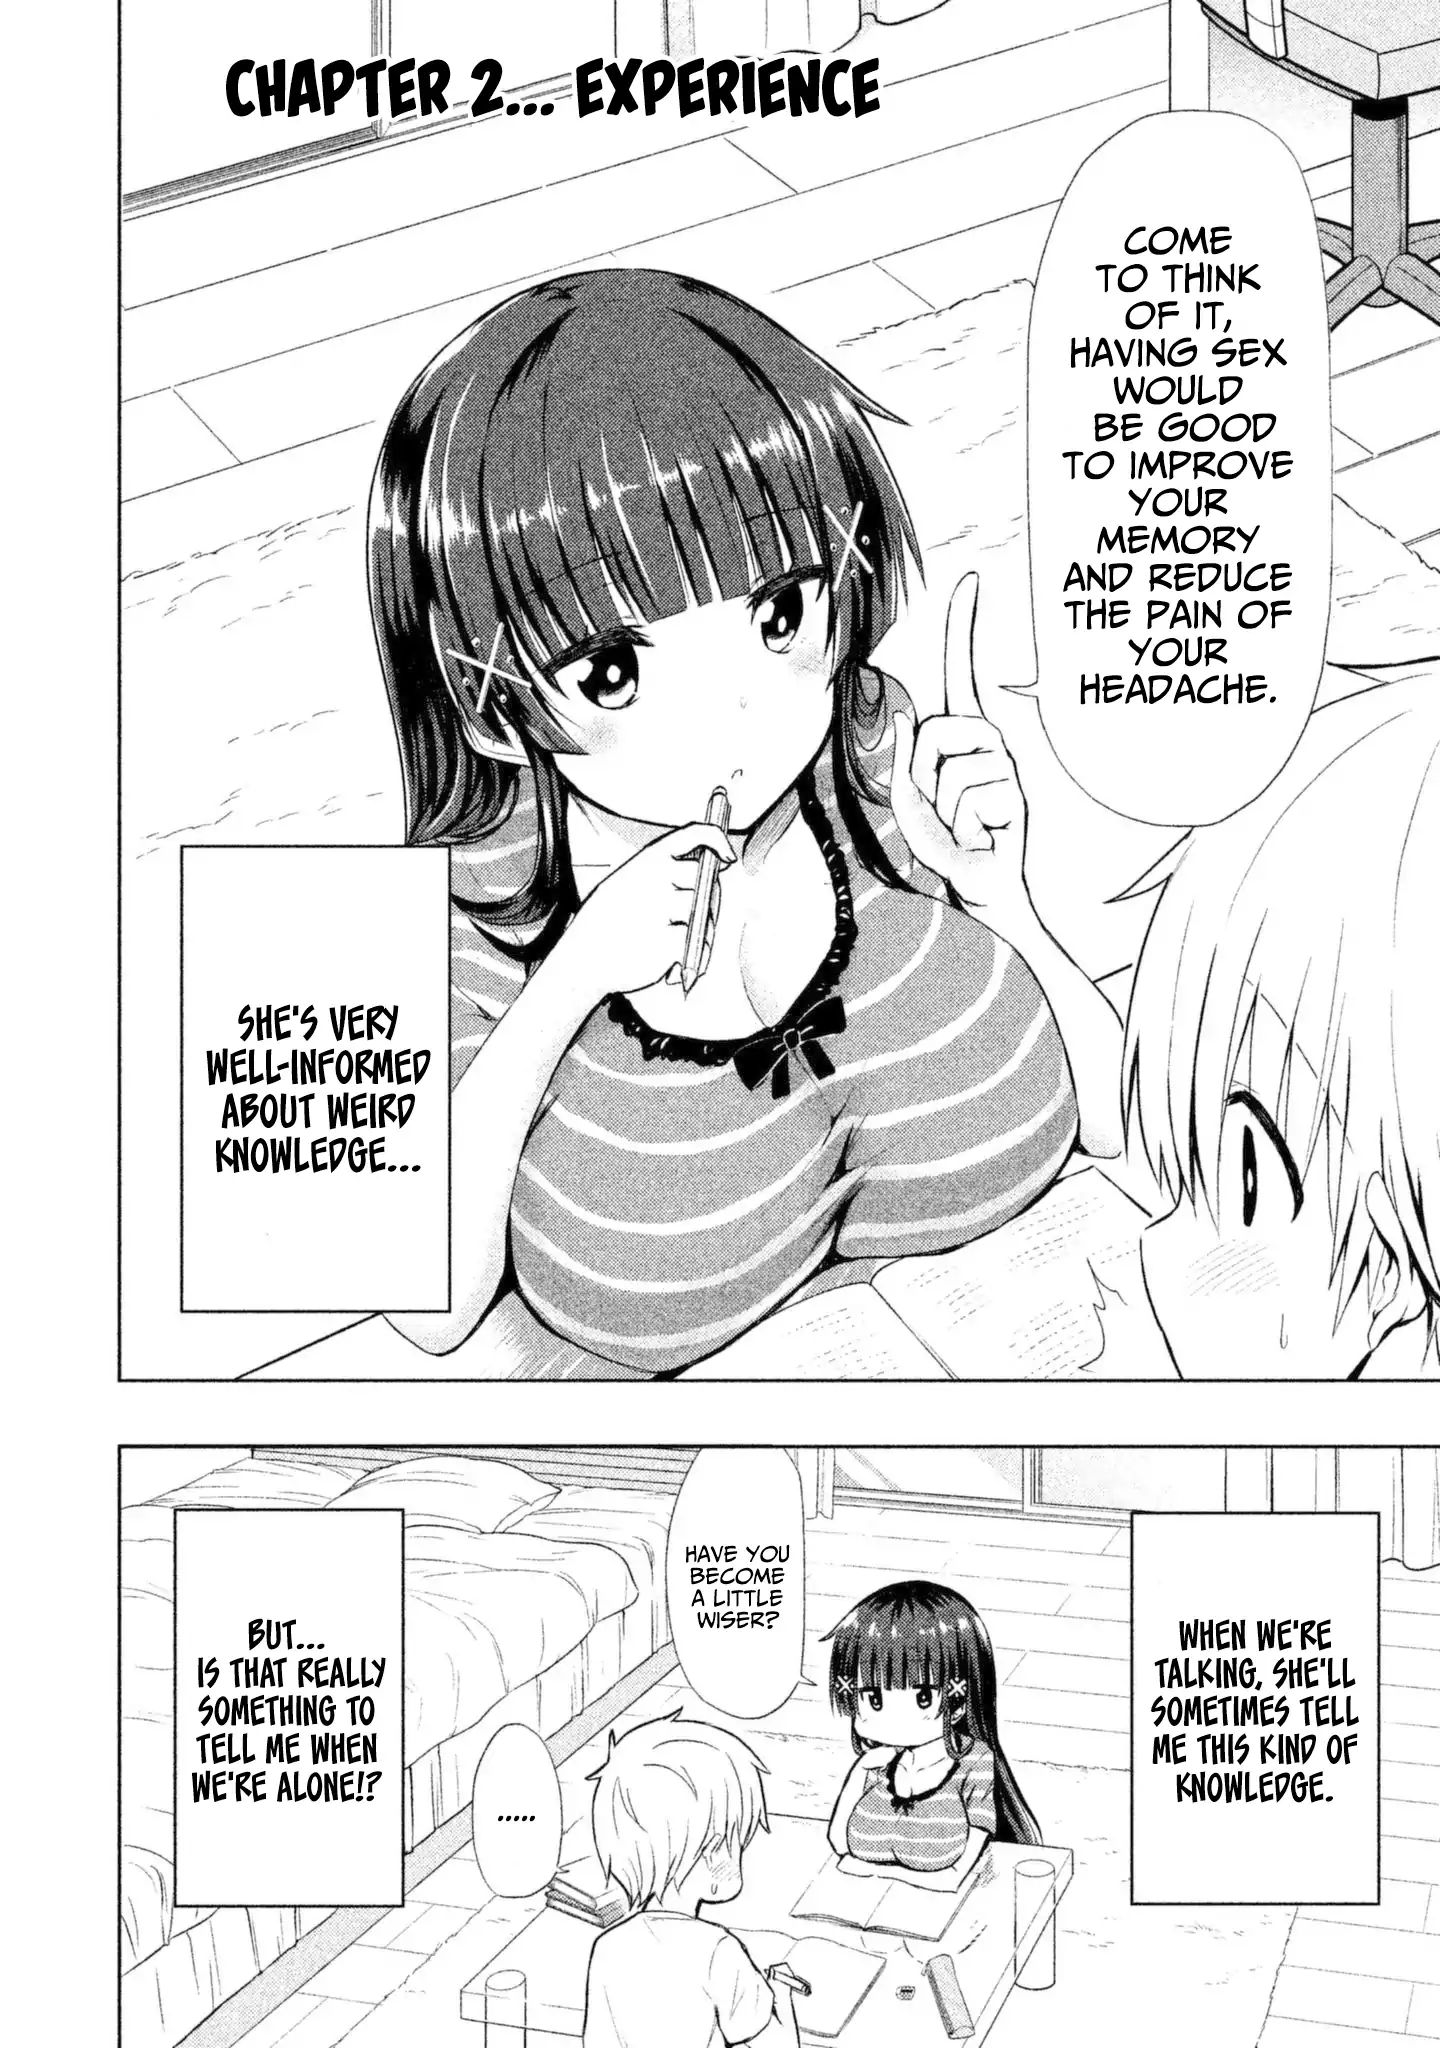 A Girl Who Is Very Well-Informed About Weird Knowledge, Takayukashiki Souko-San Chapter 2 #3